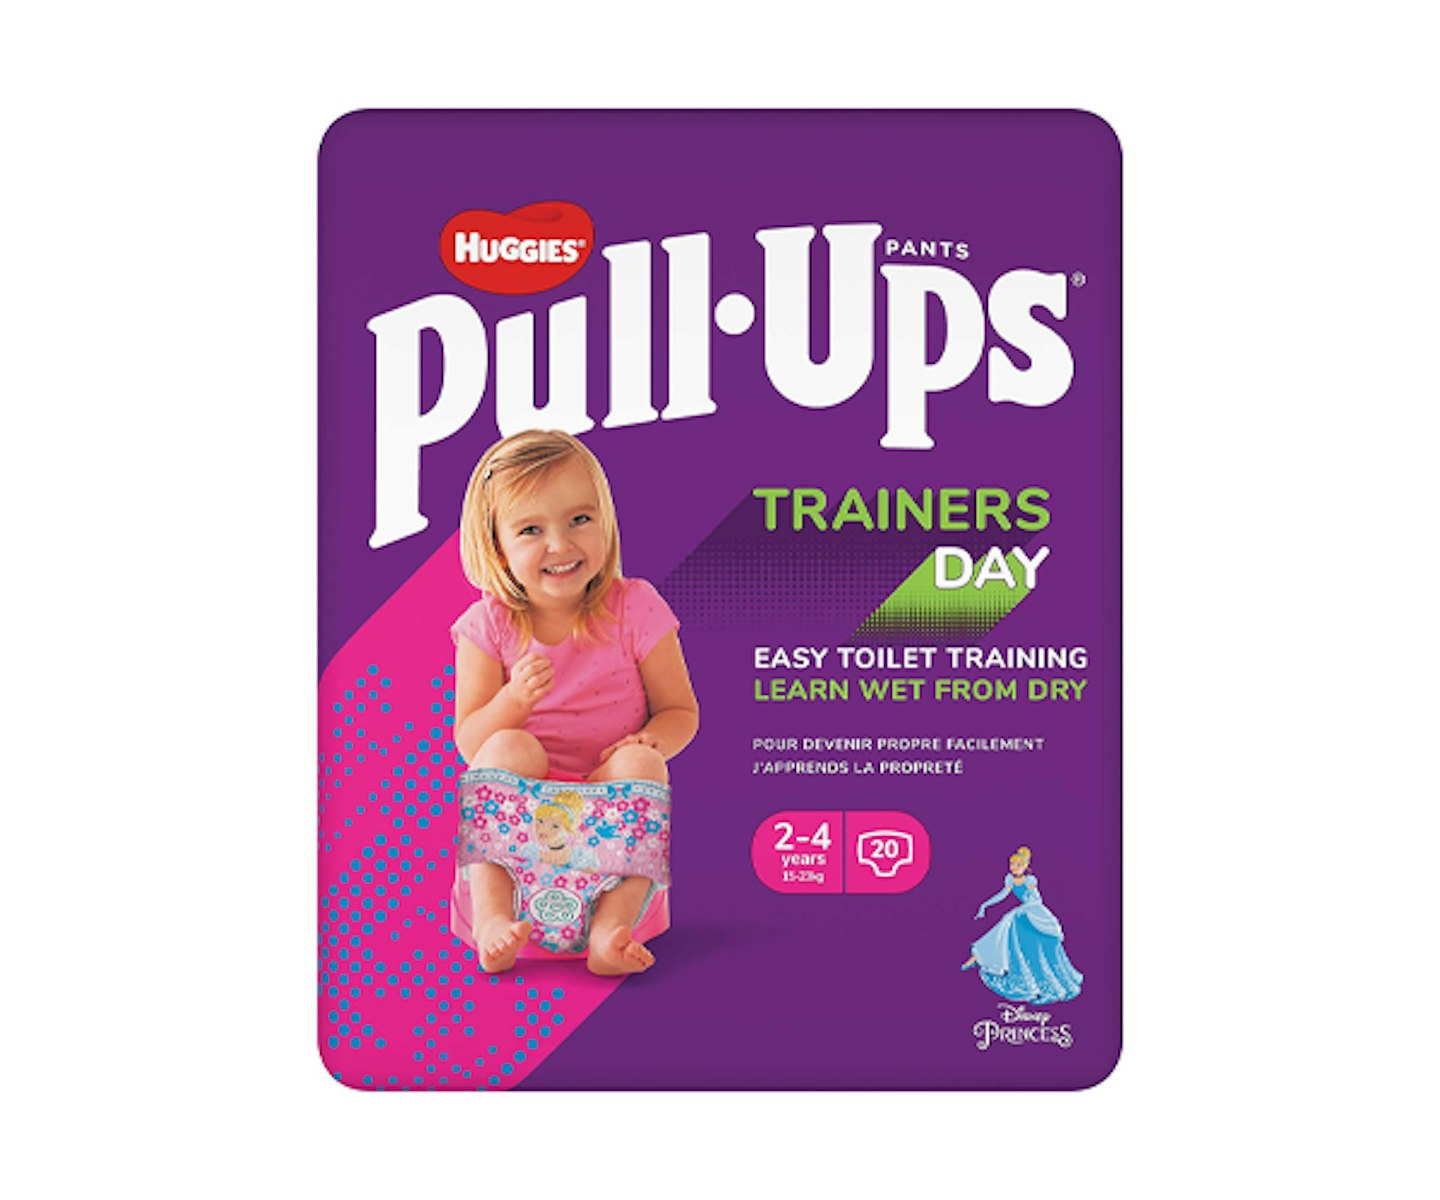 Potty Training your Big Kid with Huggies Pull-Ups, TOTS Family, Parenting, Kids, Home